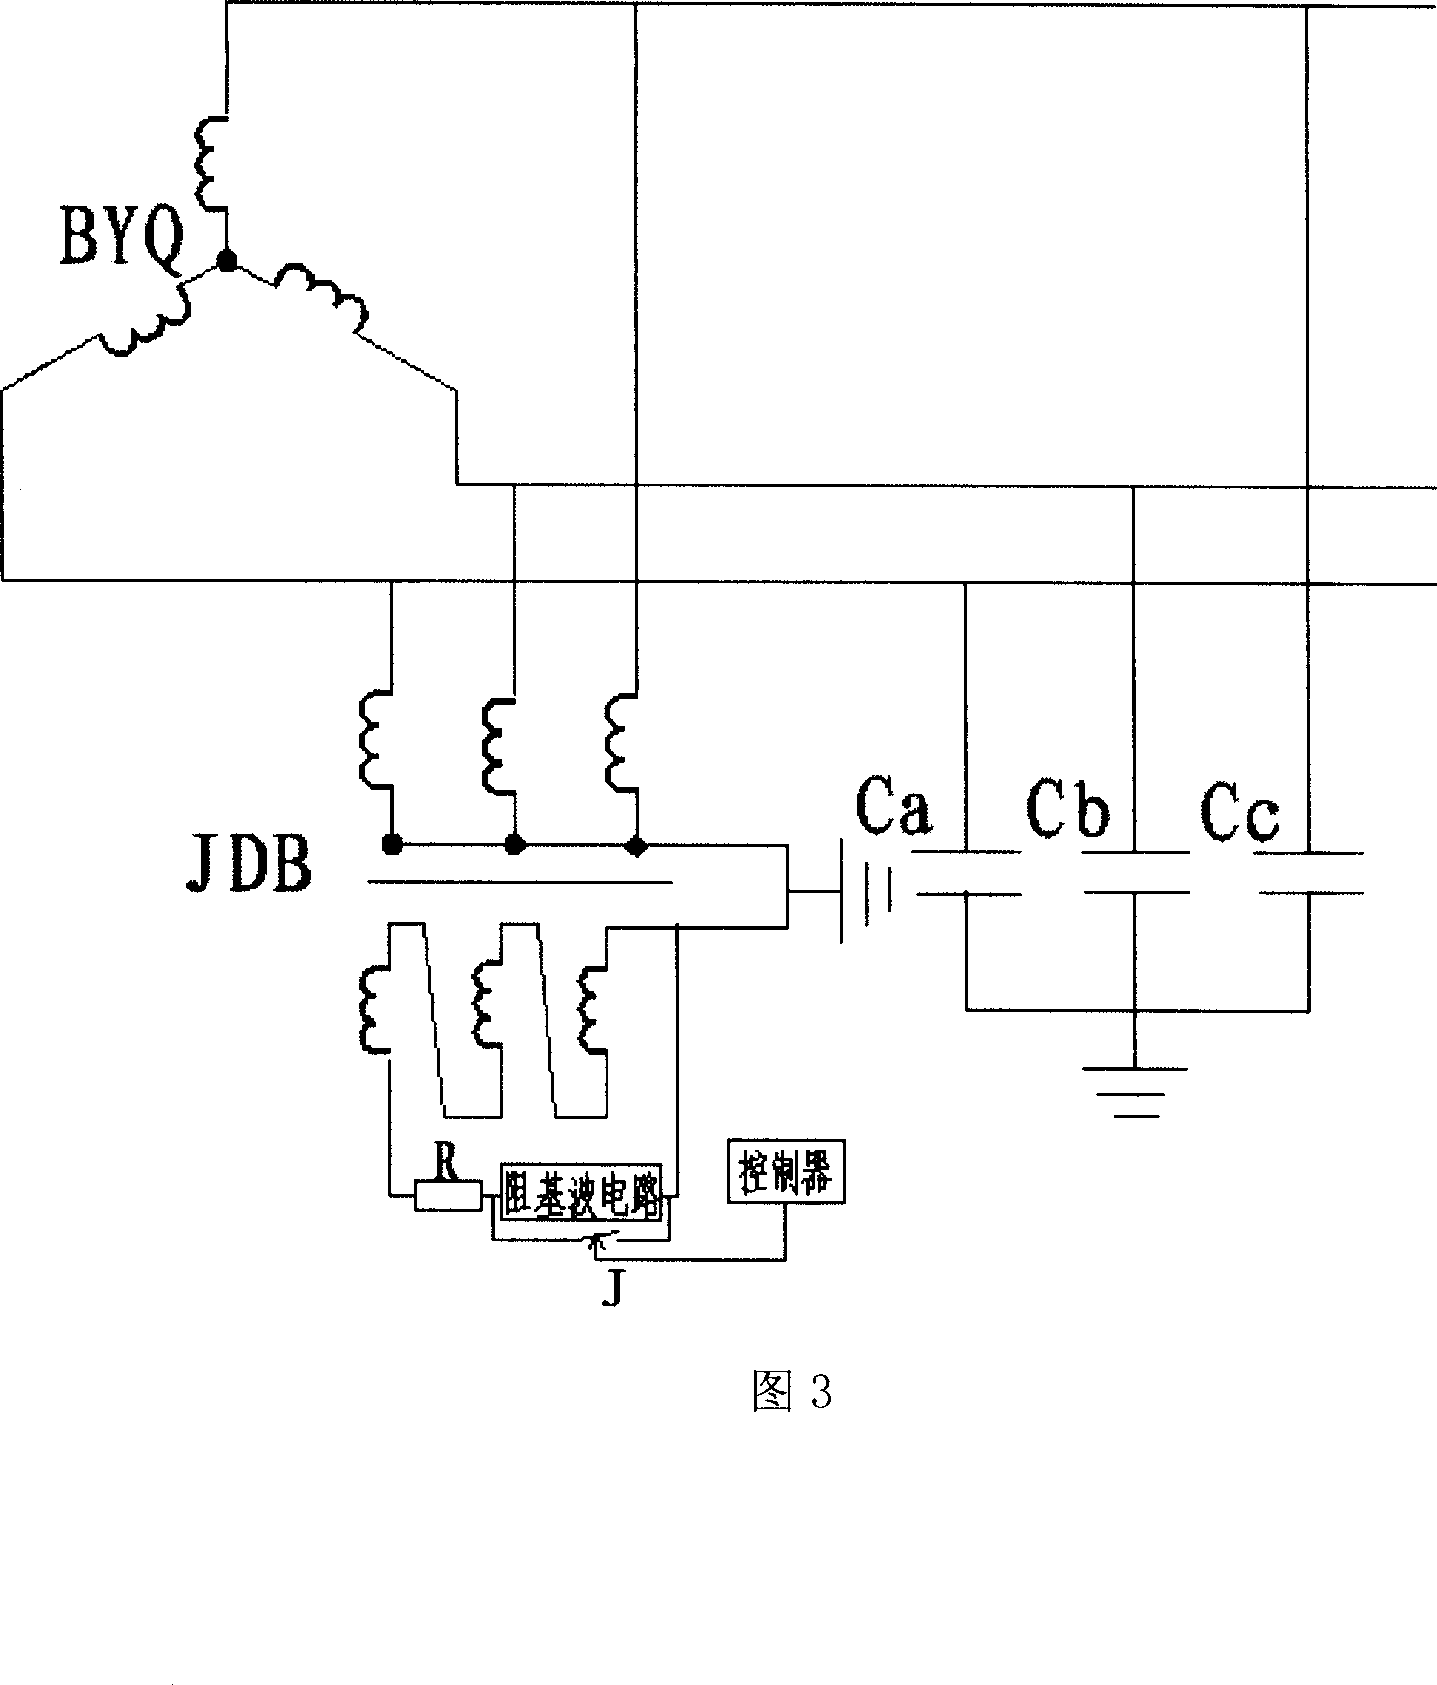 Virtual grounding power transmission and distribution system